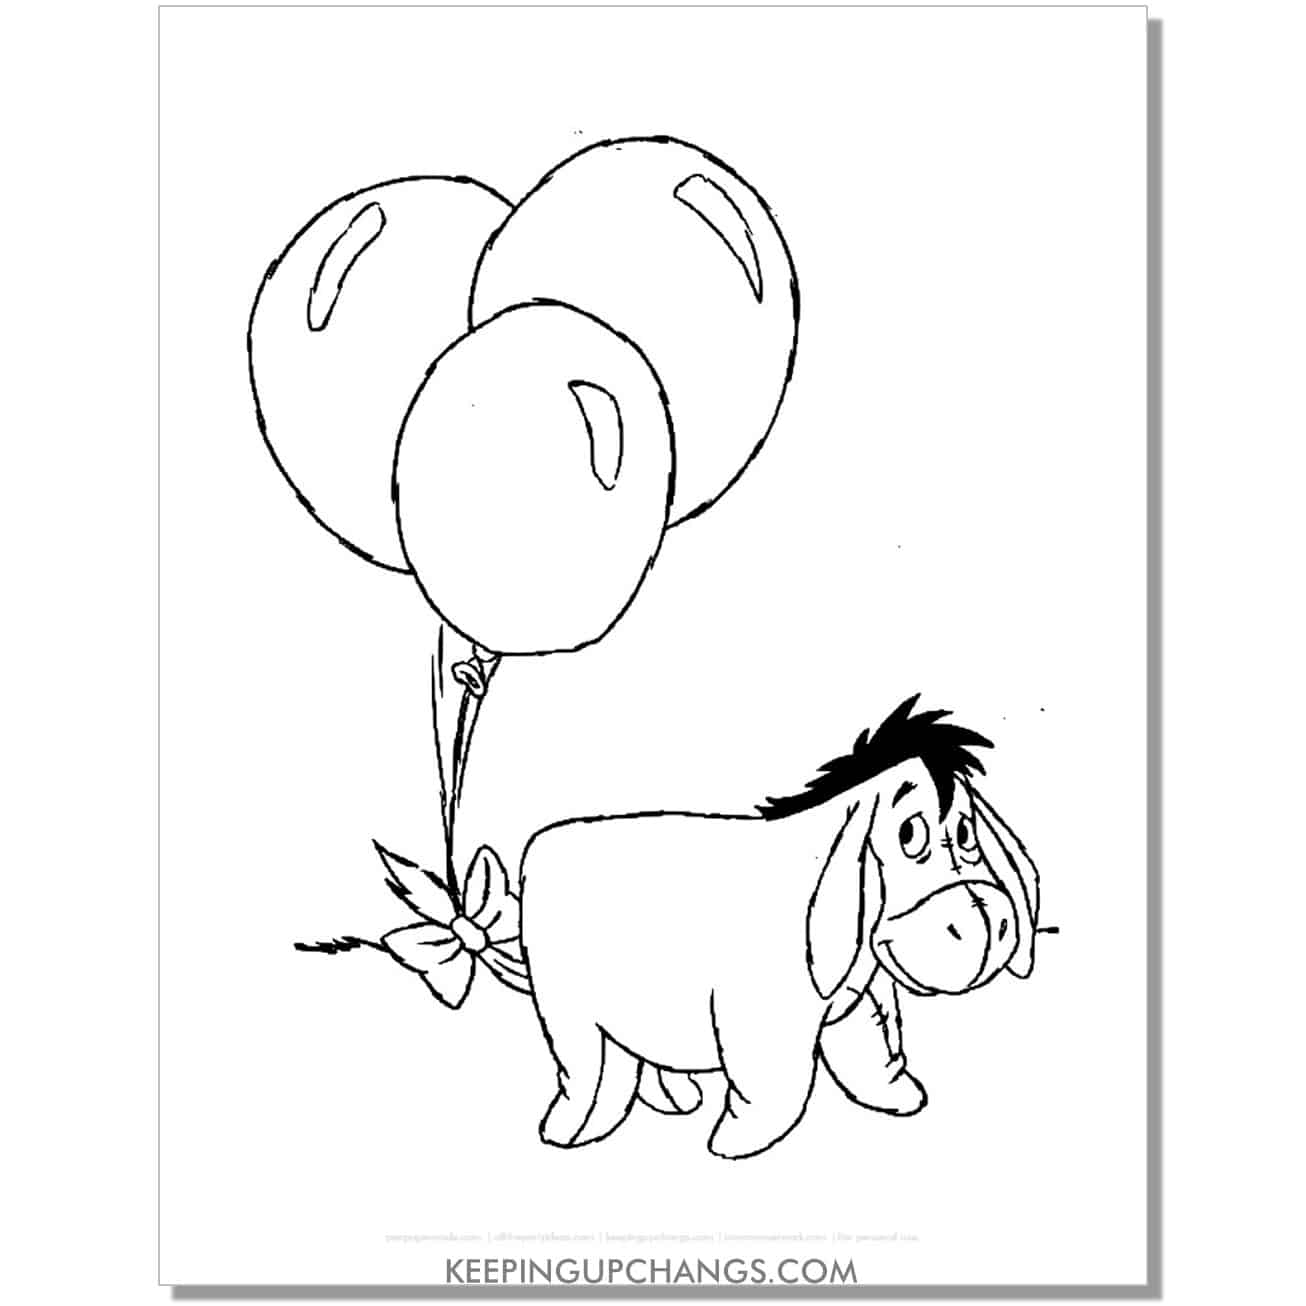 eeyore with balloons on tail coloring page, sheet.